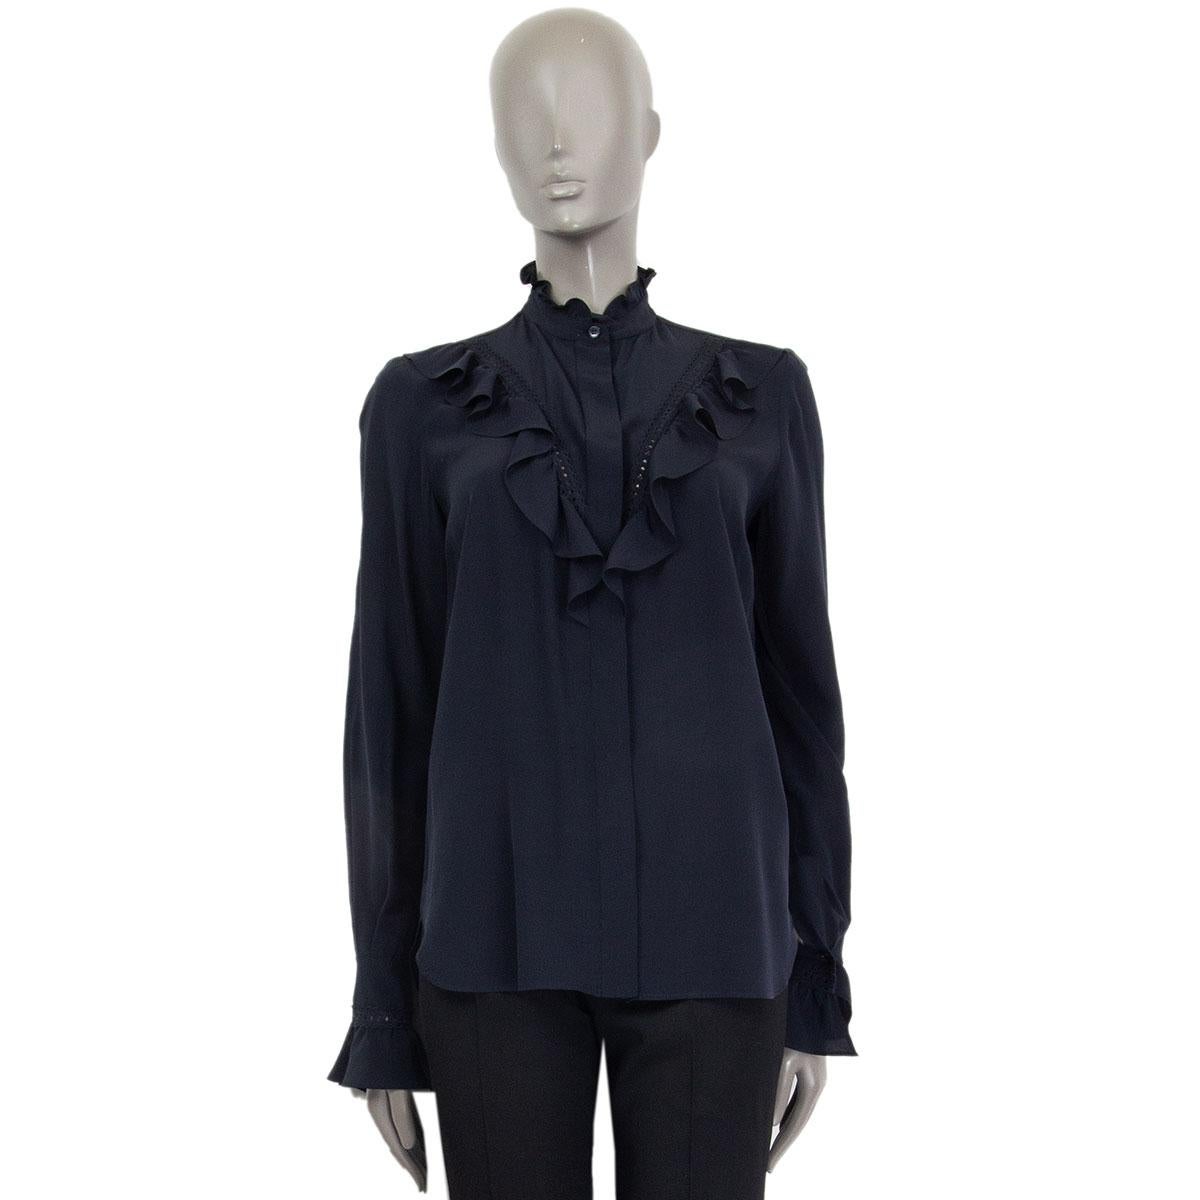 authentic Stella McCartney ruffled silk blouse featuring a stand-up collar and ruched cuffs in black silk (100%). Opens with hidden buttons. Has been worn and is in excellent condition. 

Tag Size 38
Size XS
Shoulder Width3 7cm (14.4in)
Bust 94cm